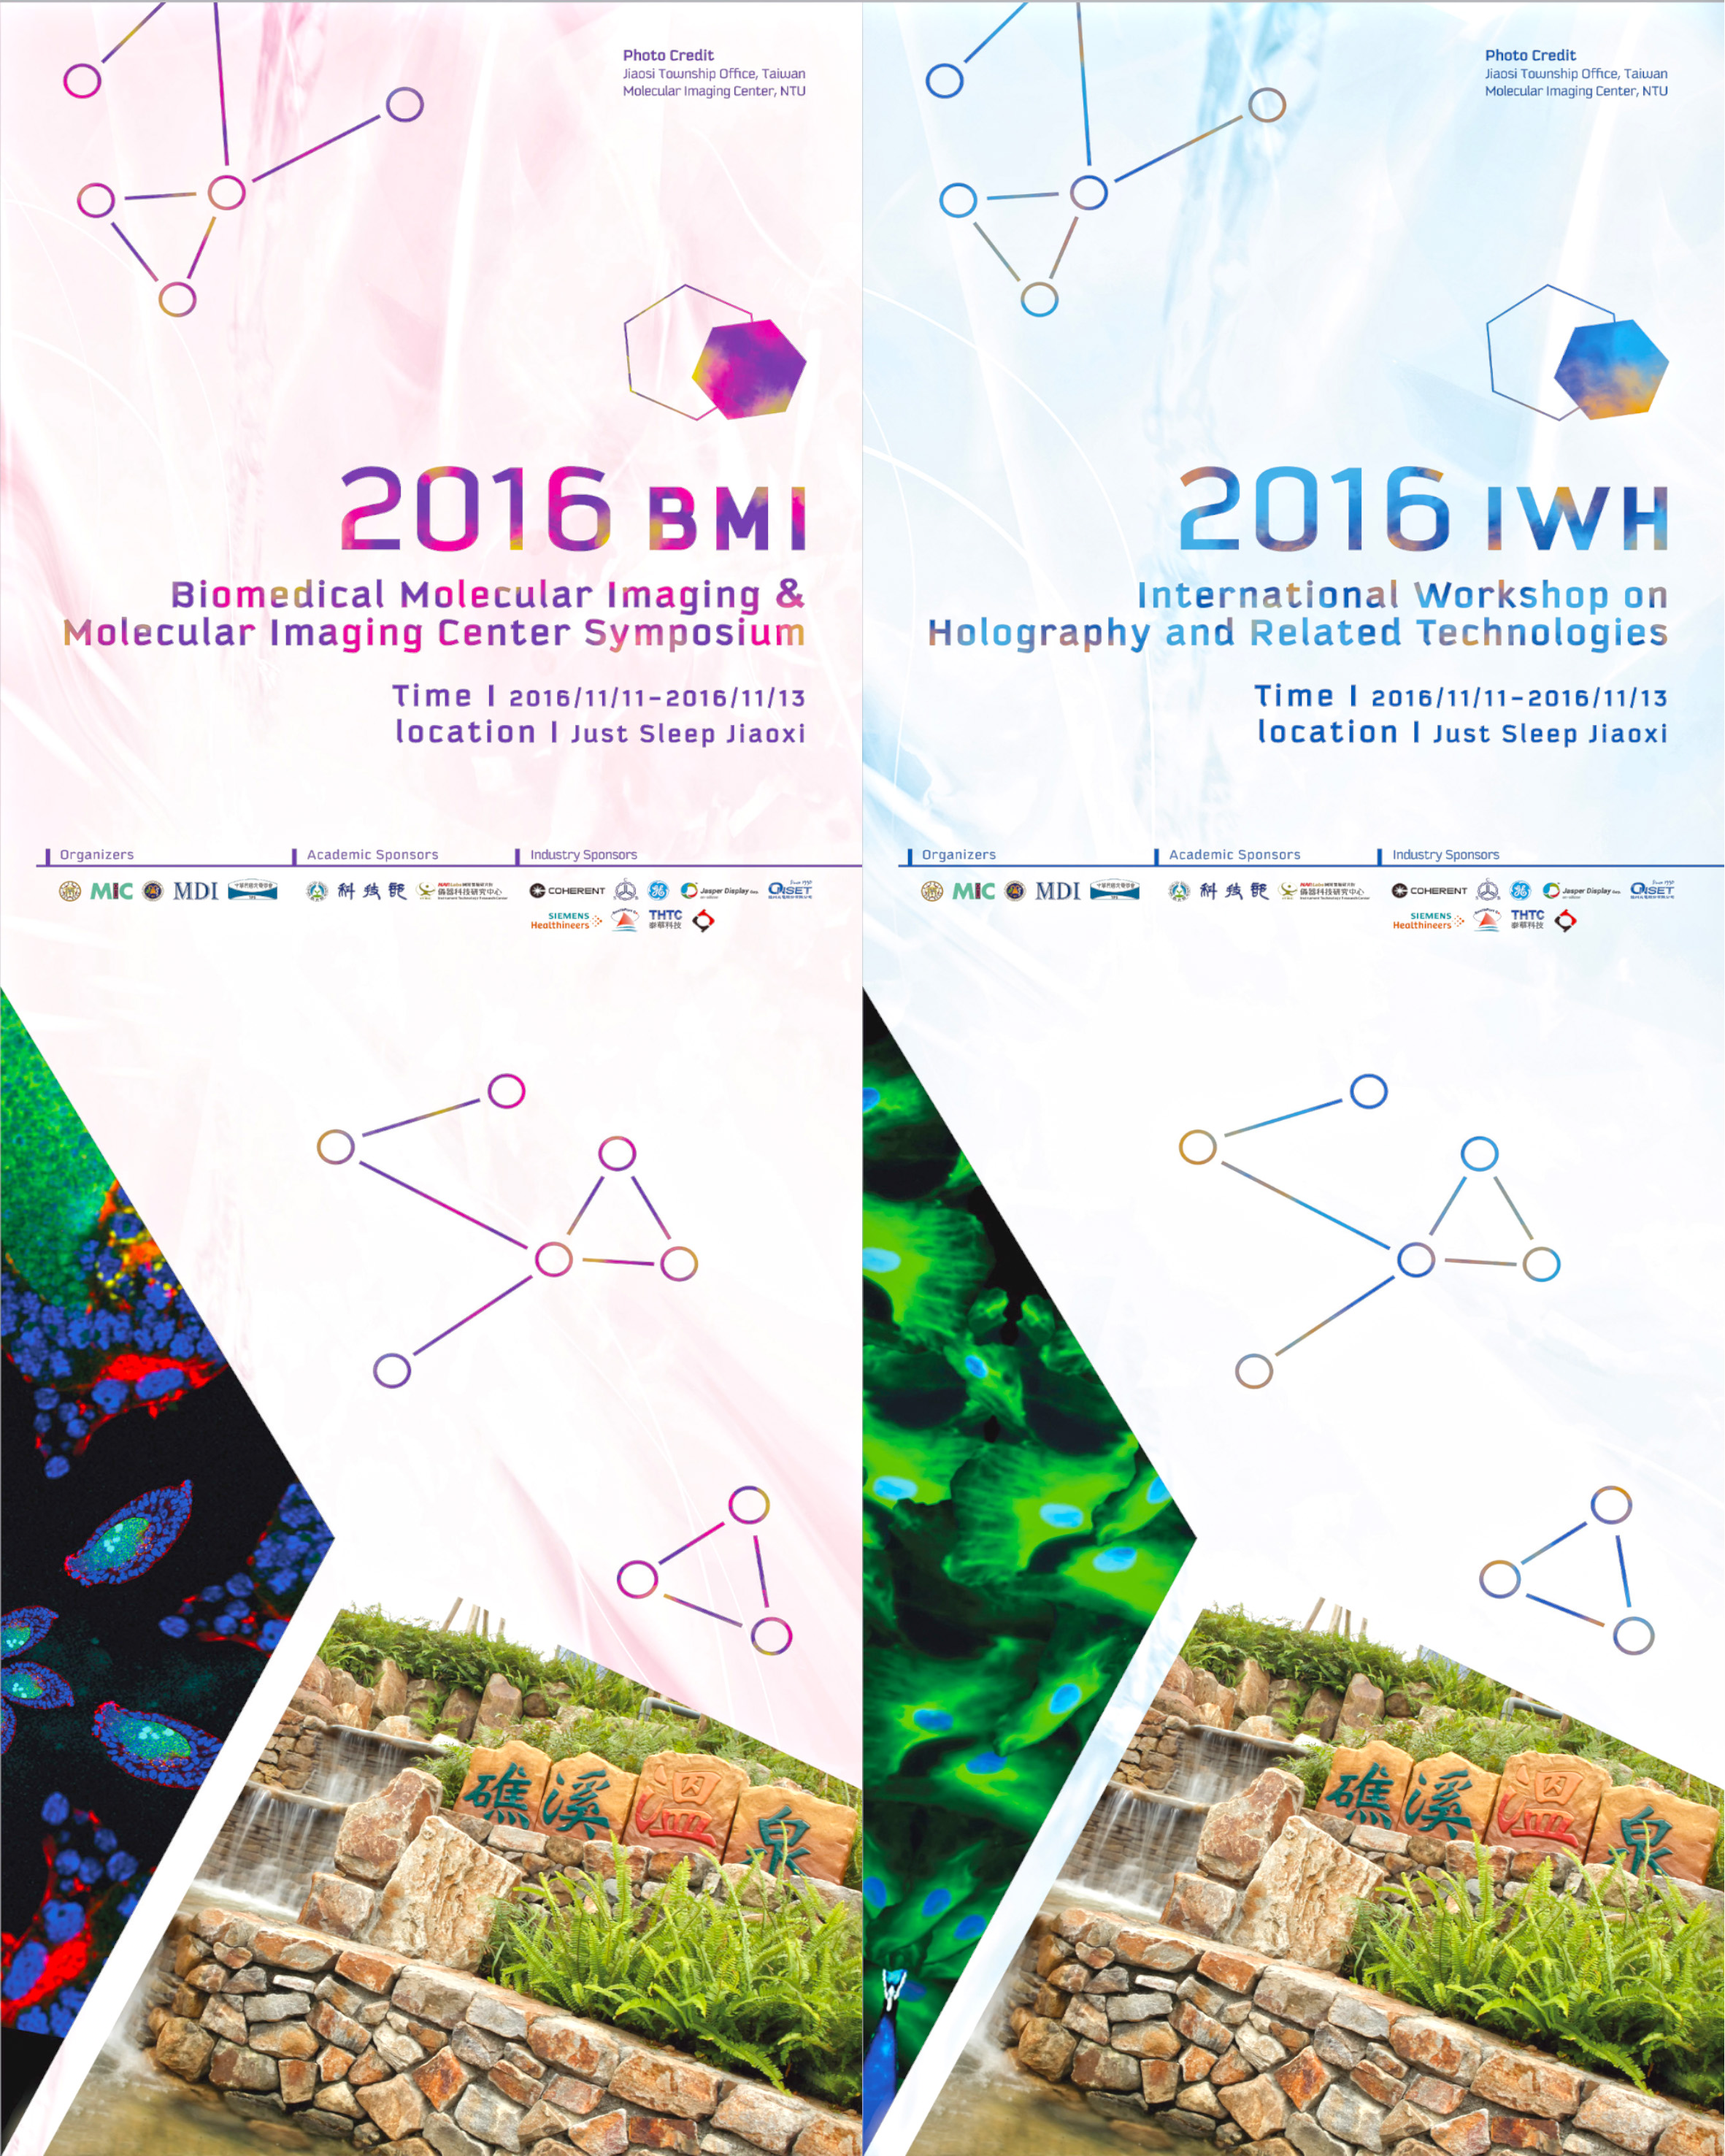 BMI 2016 & IWH 2016 Standing Sign